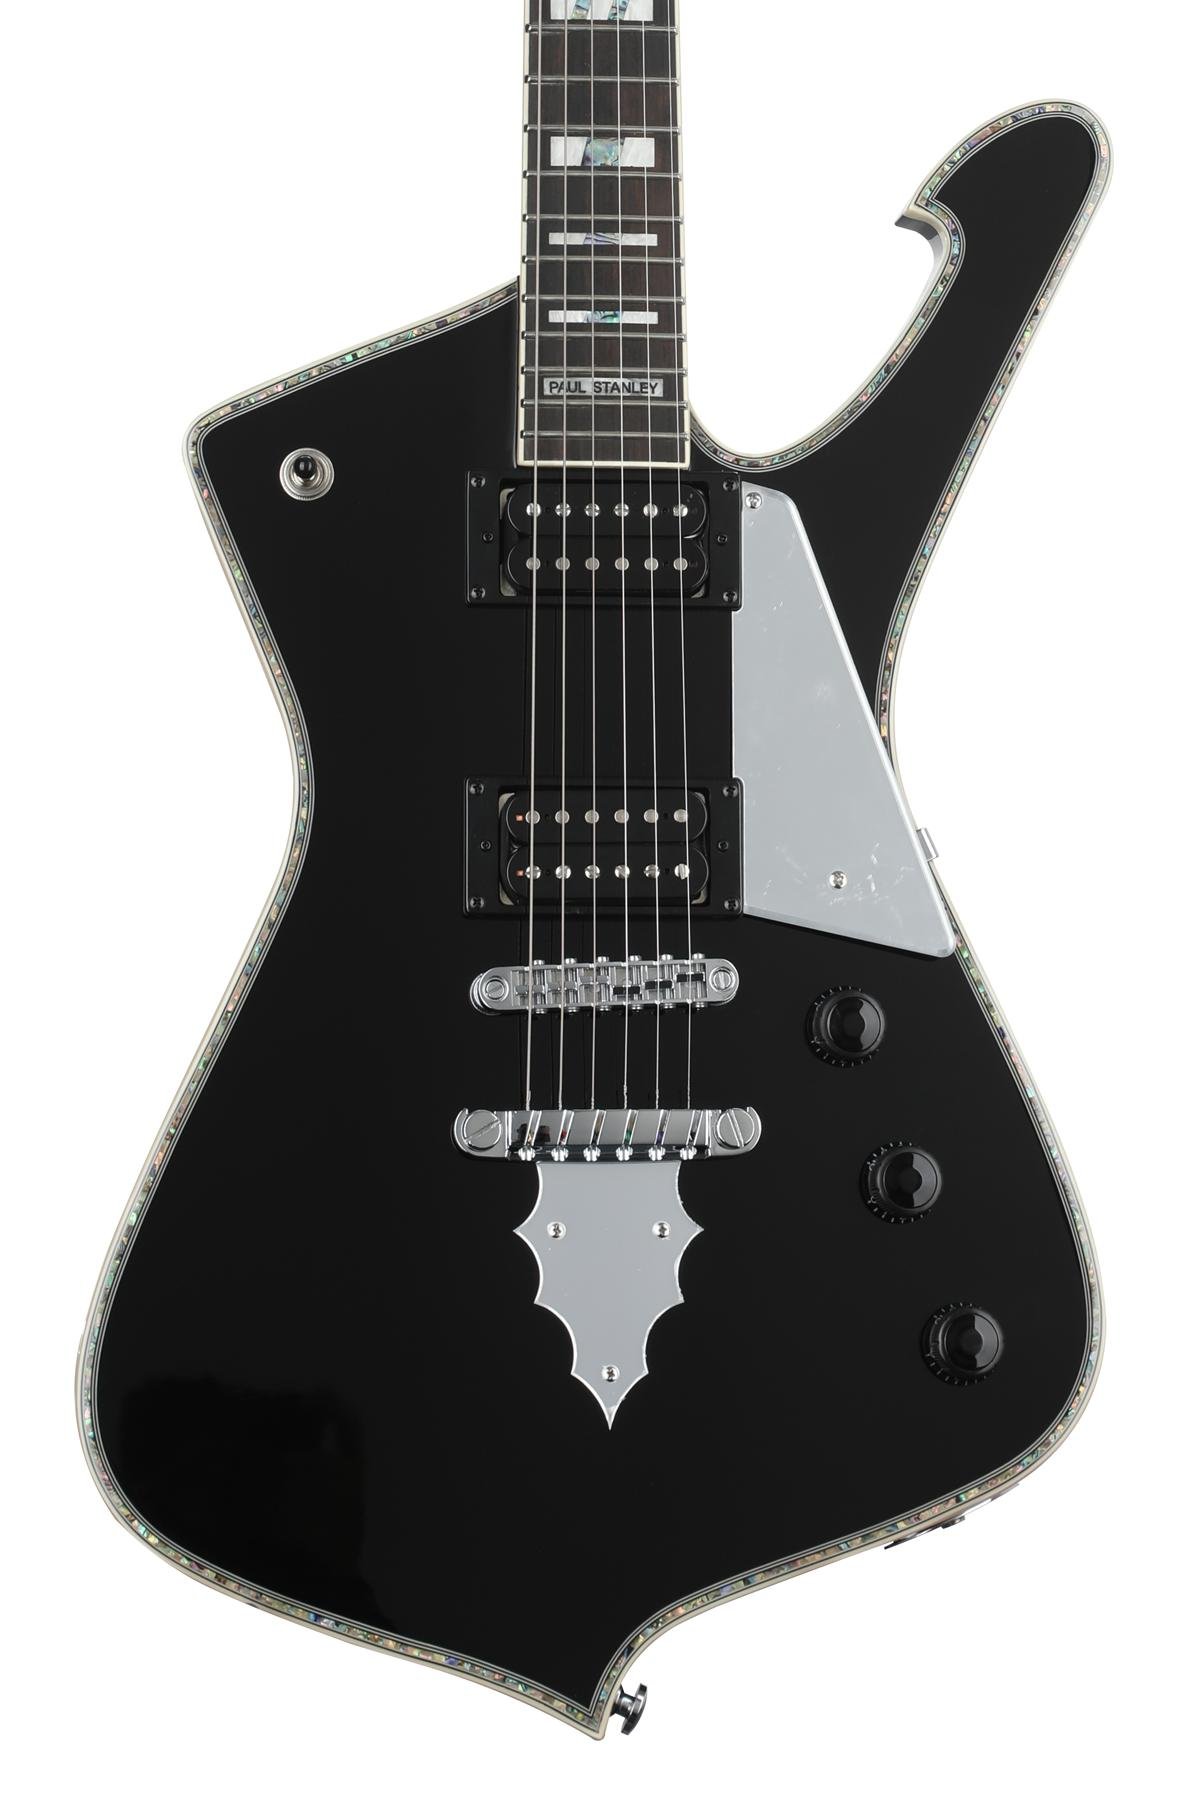 Ibanez Paul Stanley Signature PS120 - Black | Sweetwater